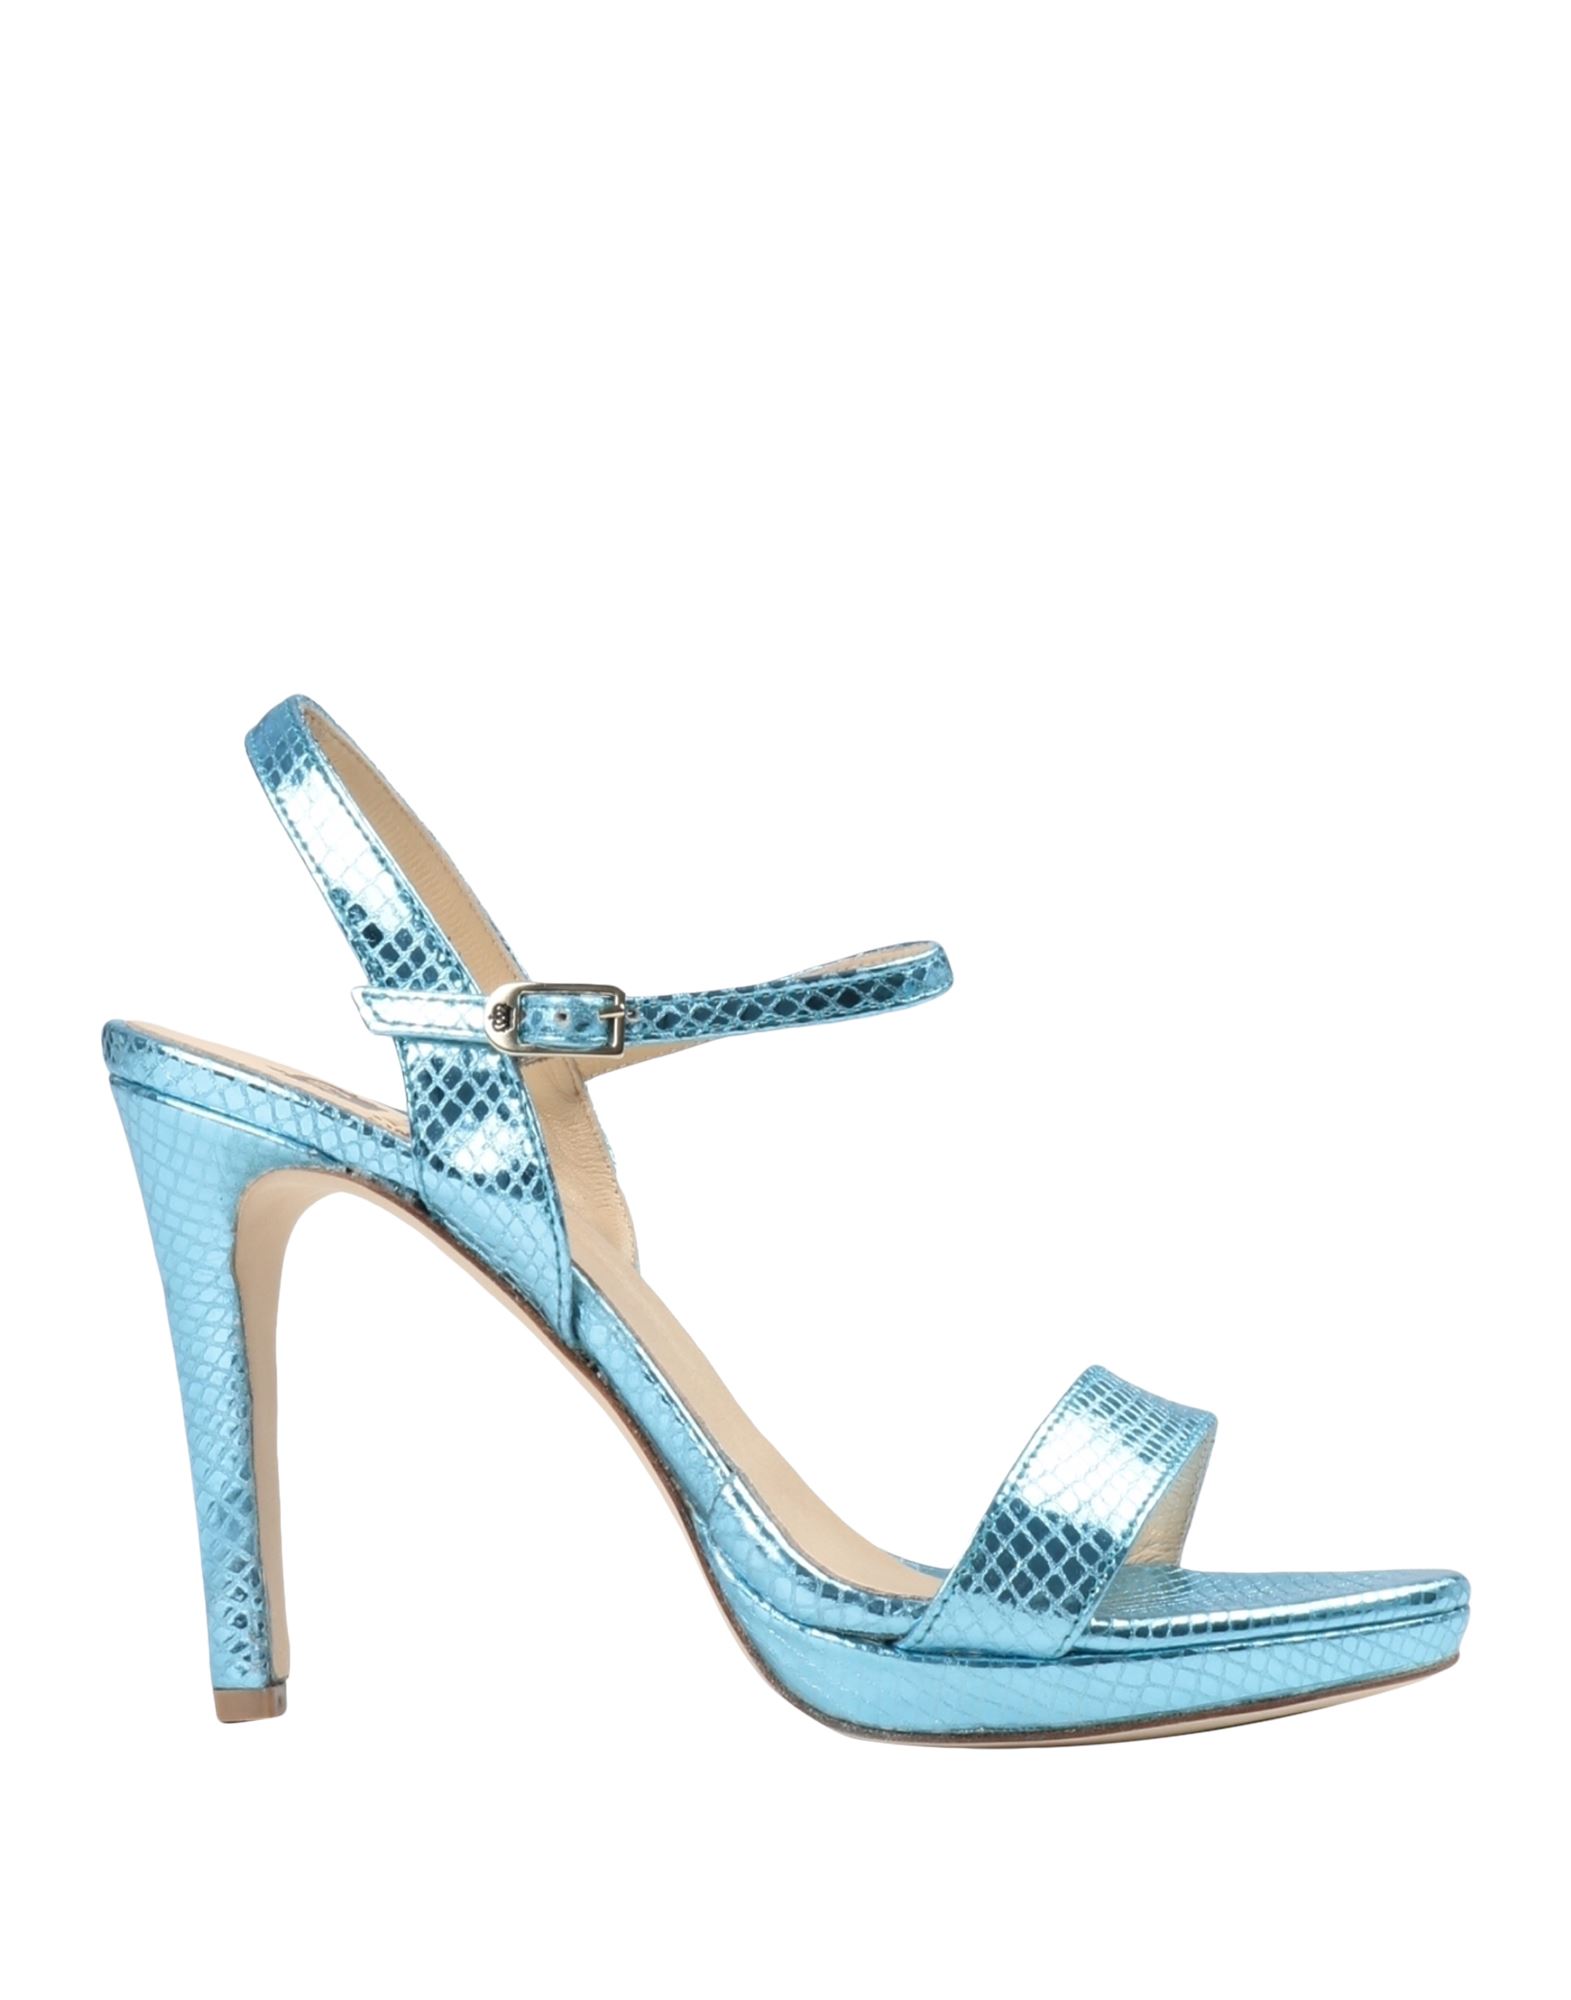 L'arianna Woman Sandals Sky Blue Size 8 Soft Leather